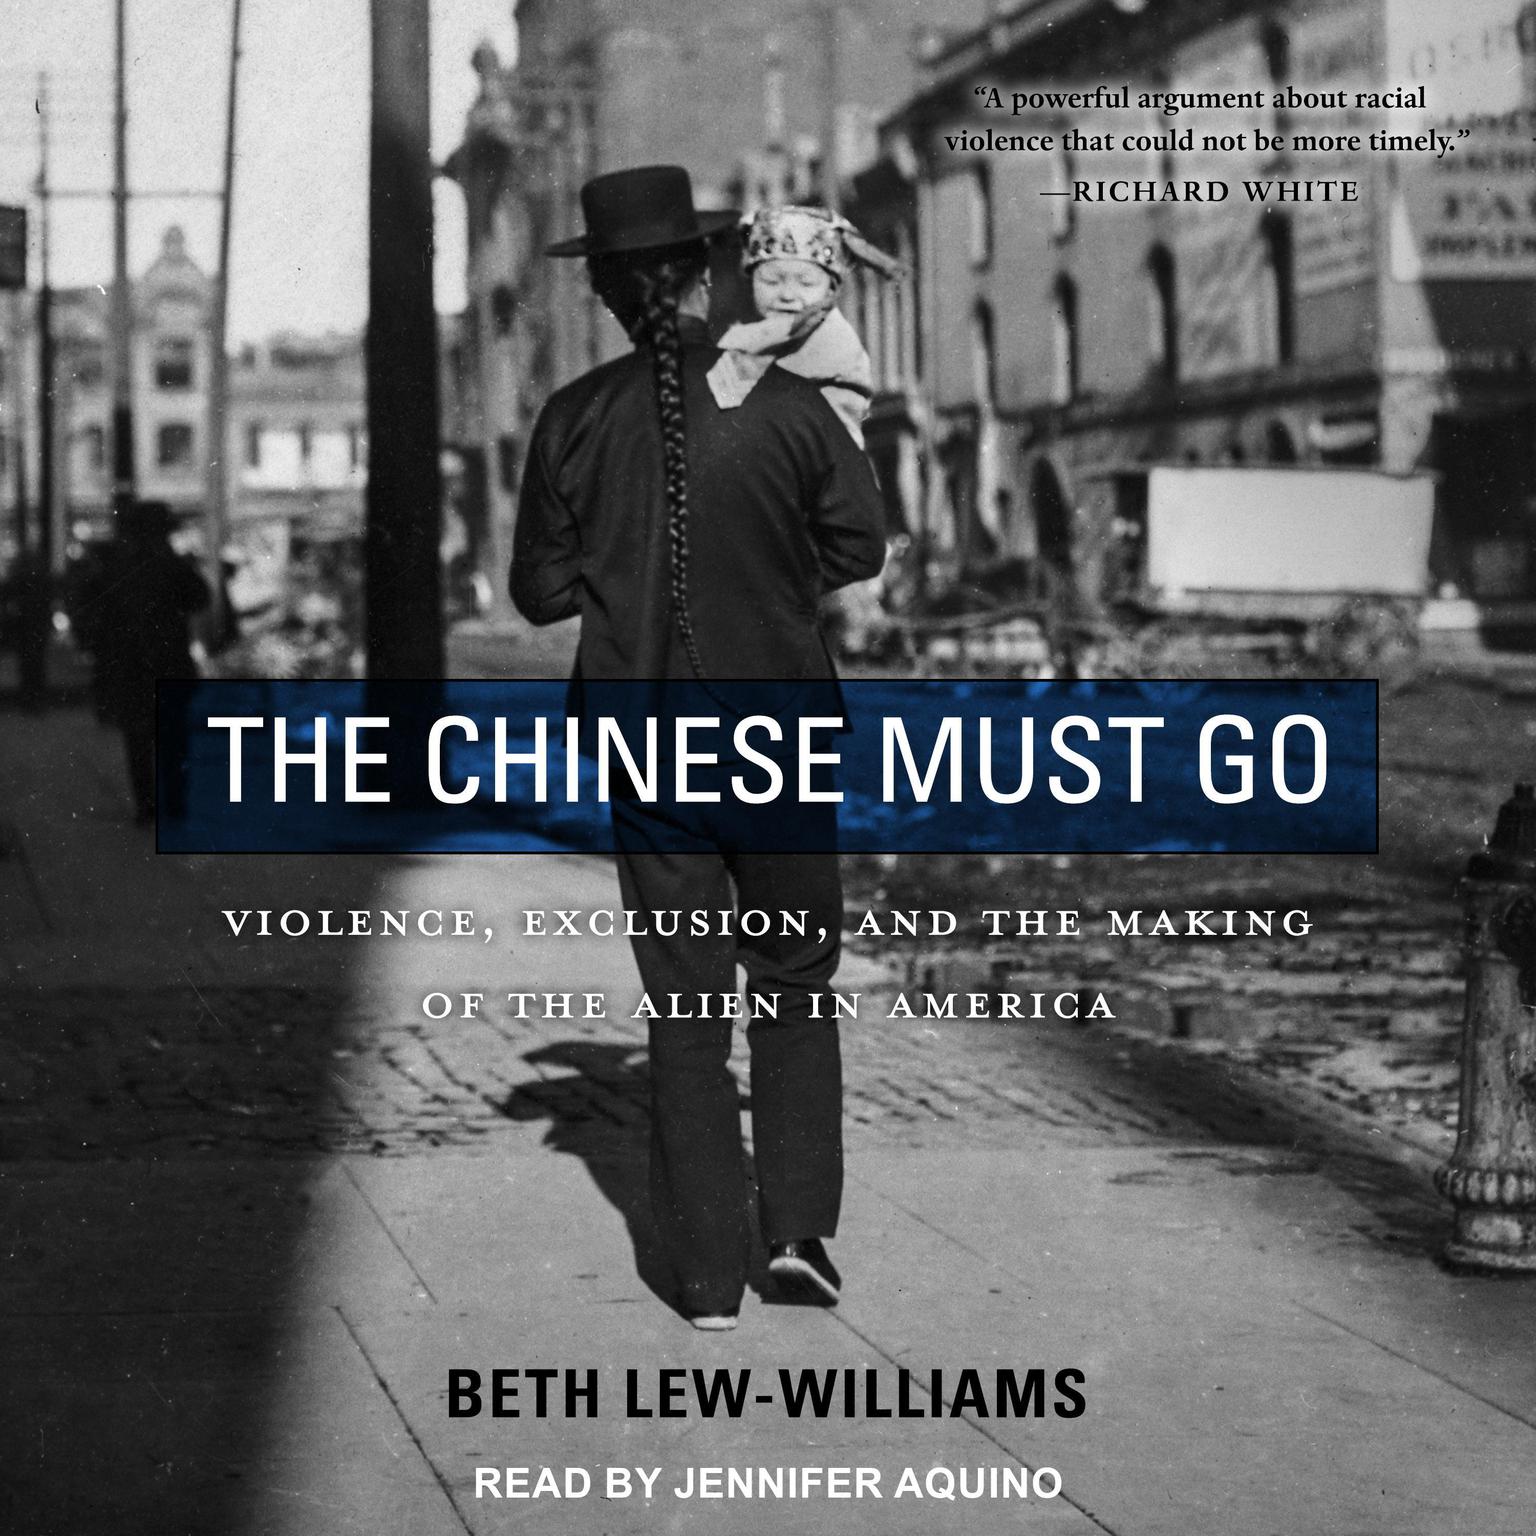 The Chinese Must Go: Violence, Exclusion, and the Making of the Alien in America Audiobook, by Beth Lew-Williams